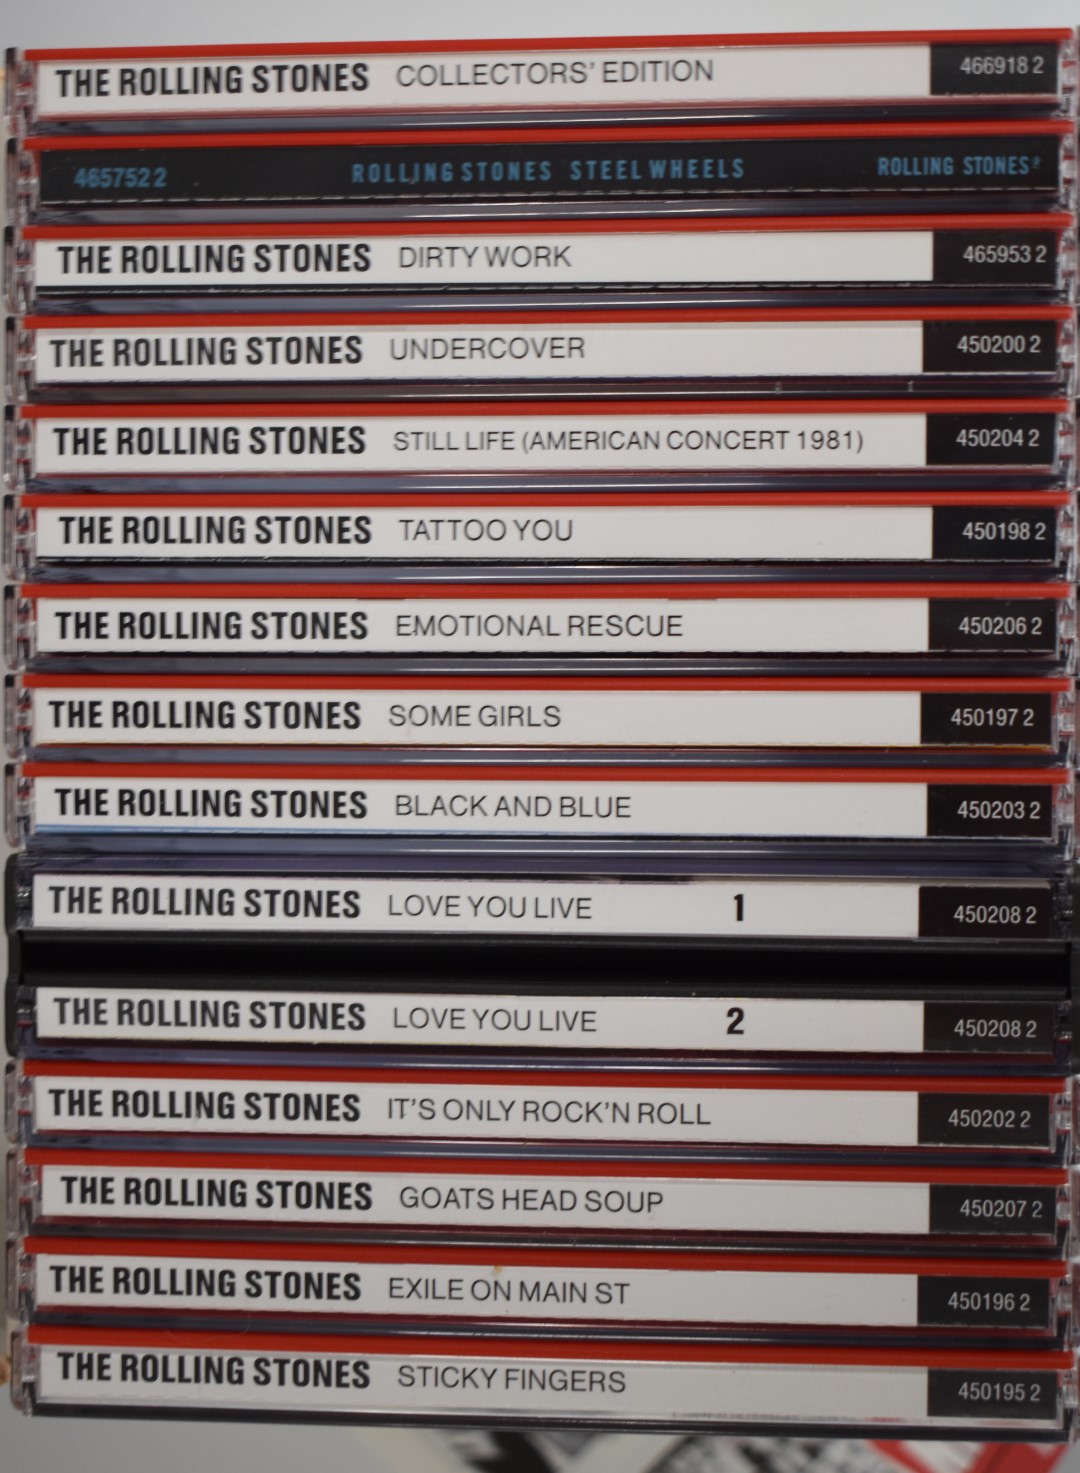 The Rolling Stones - Collection 1971-1989 (4669182) CD box set. CDs etc appear EX with wear/ageing - Image 5 of 5